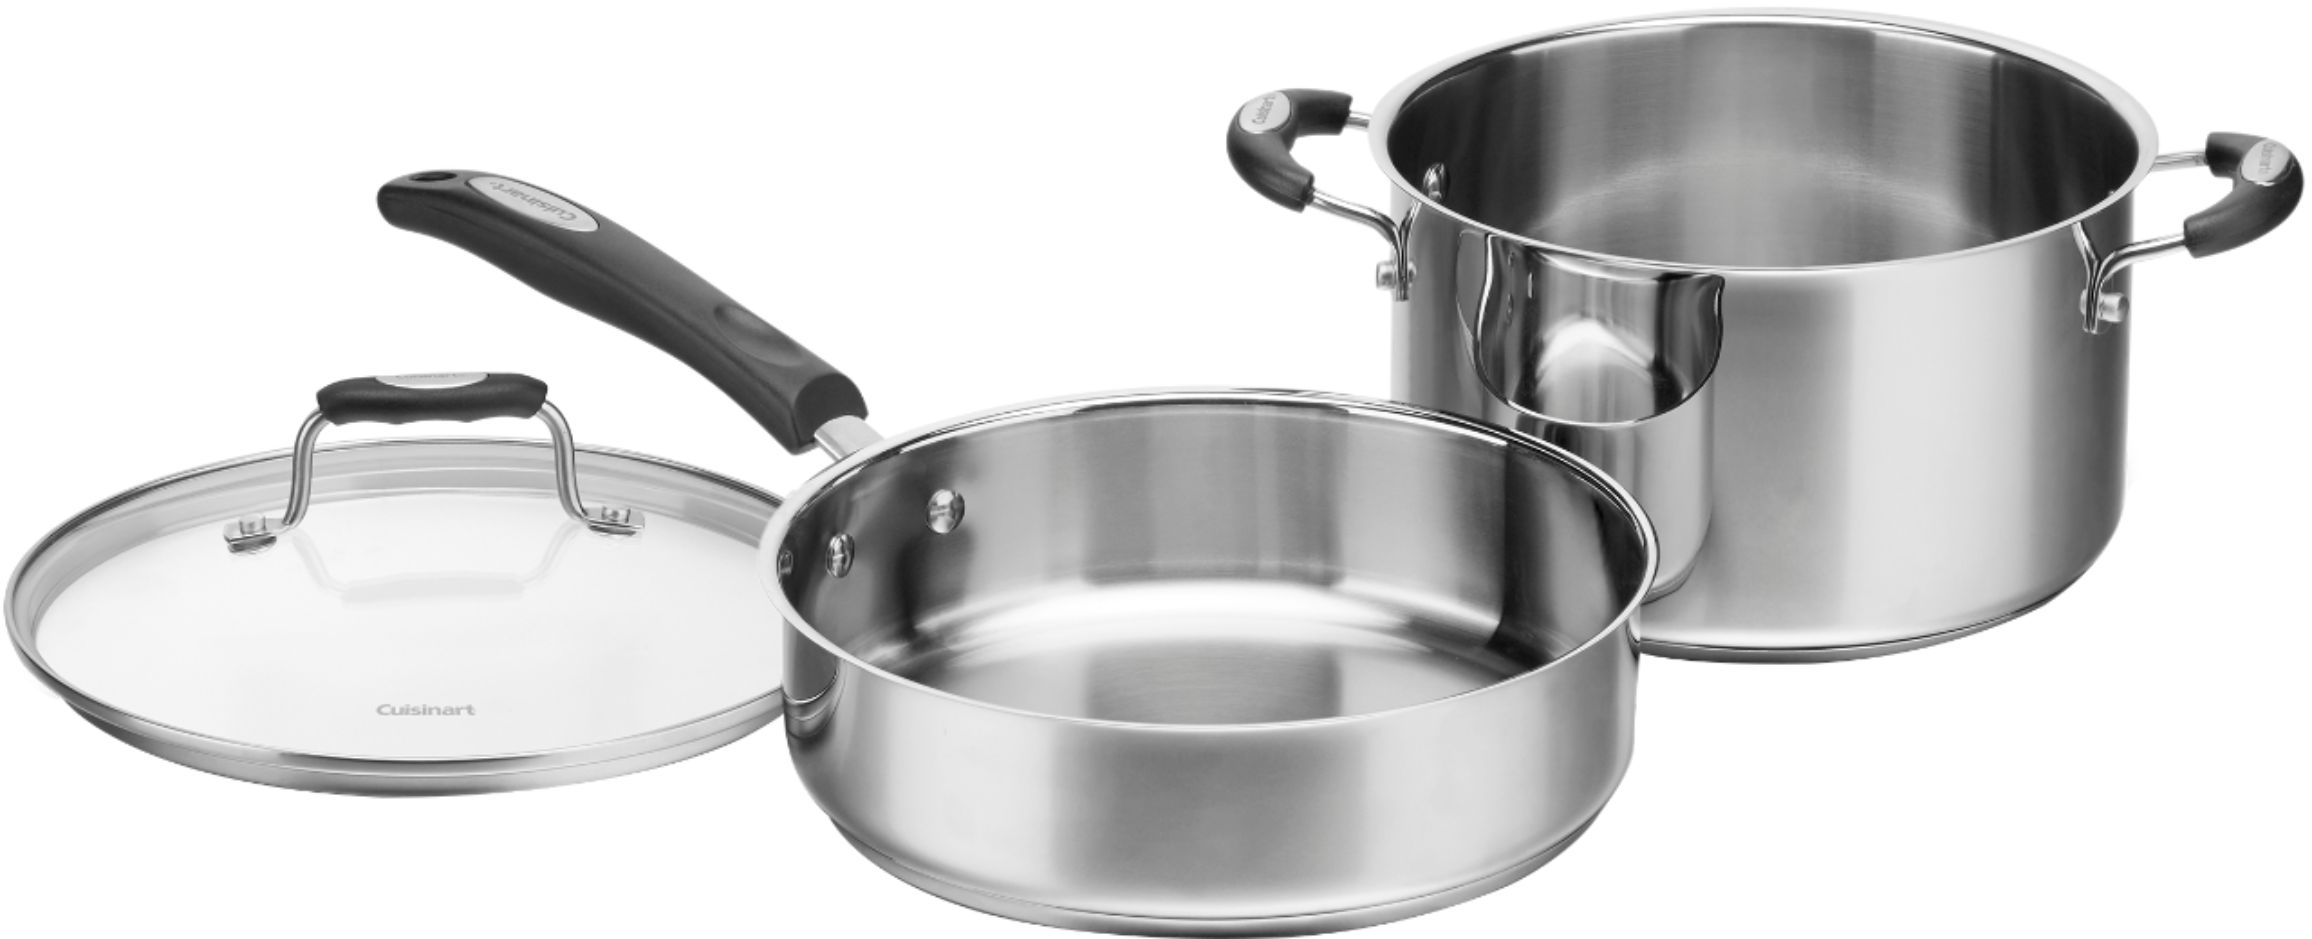 A full 12-piece Cuisinart cookware set for just $80 -- today only - CNET